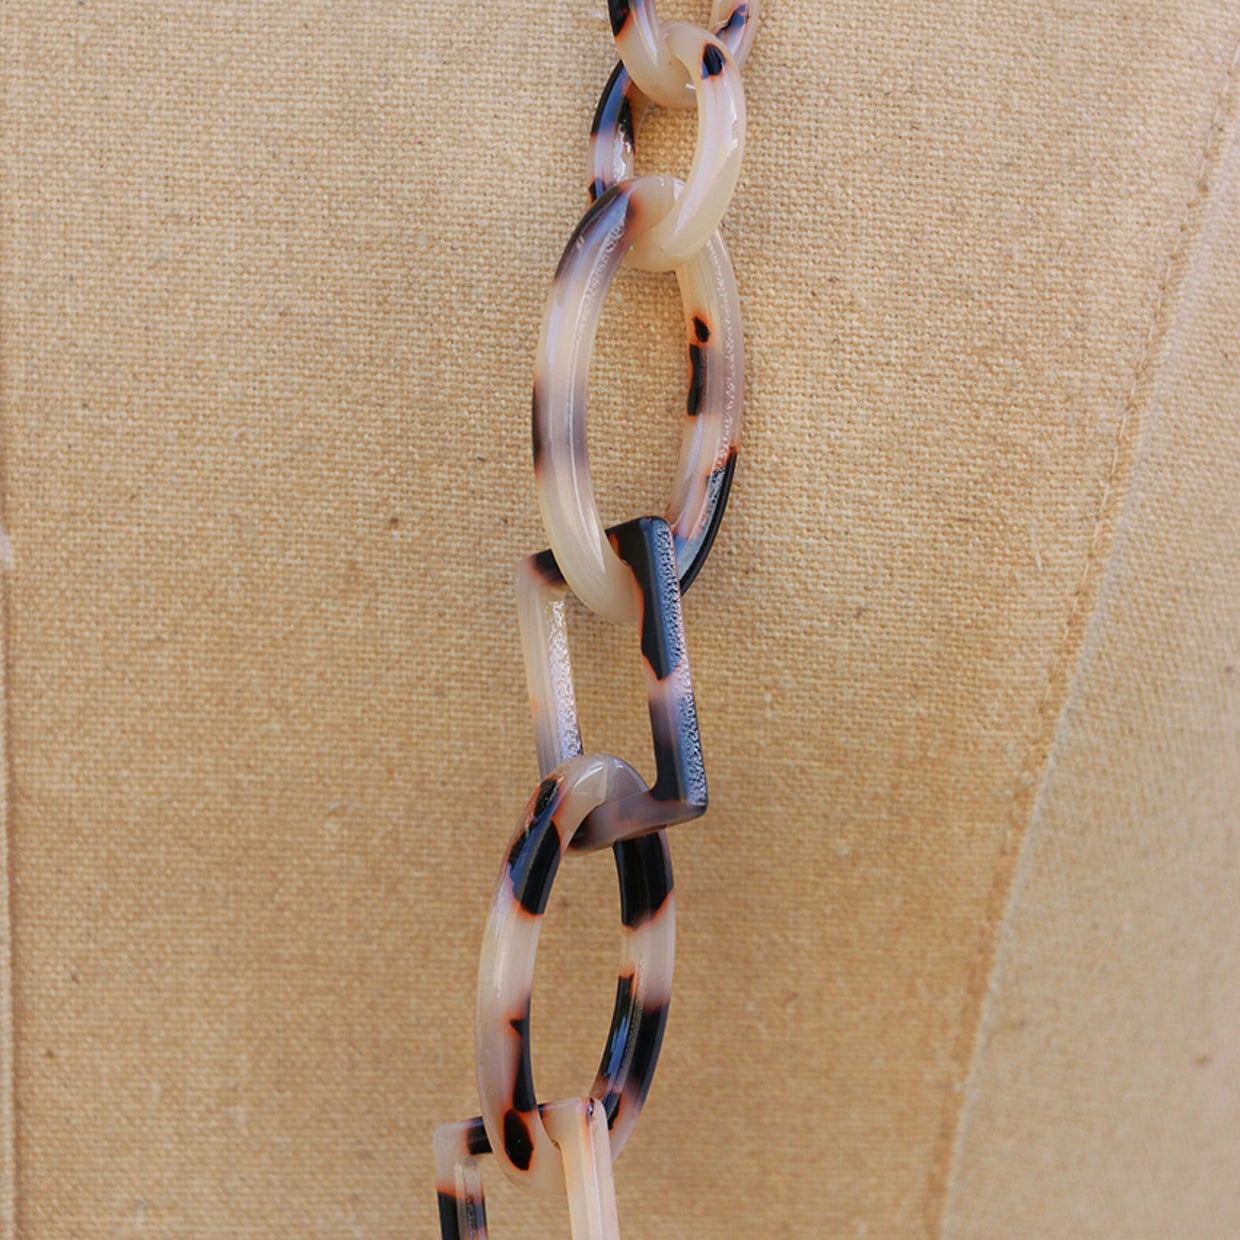  Beige Tortoise Shell Style Chain & Link Necklace SPRING SPECIAL